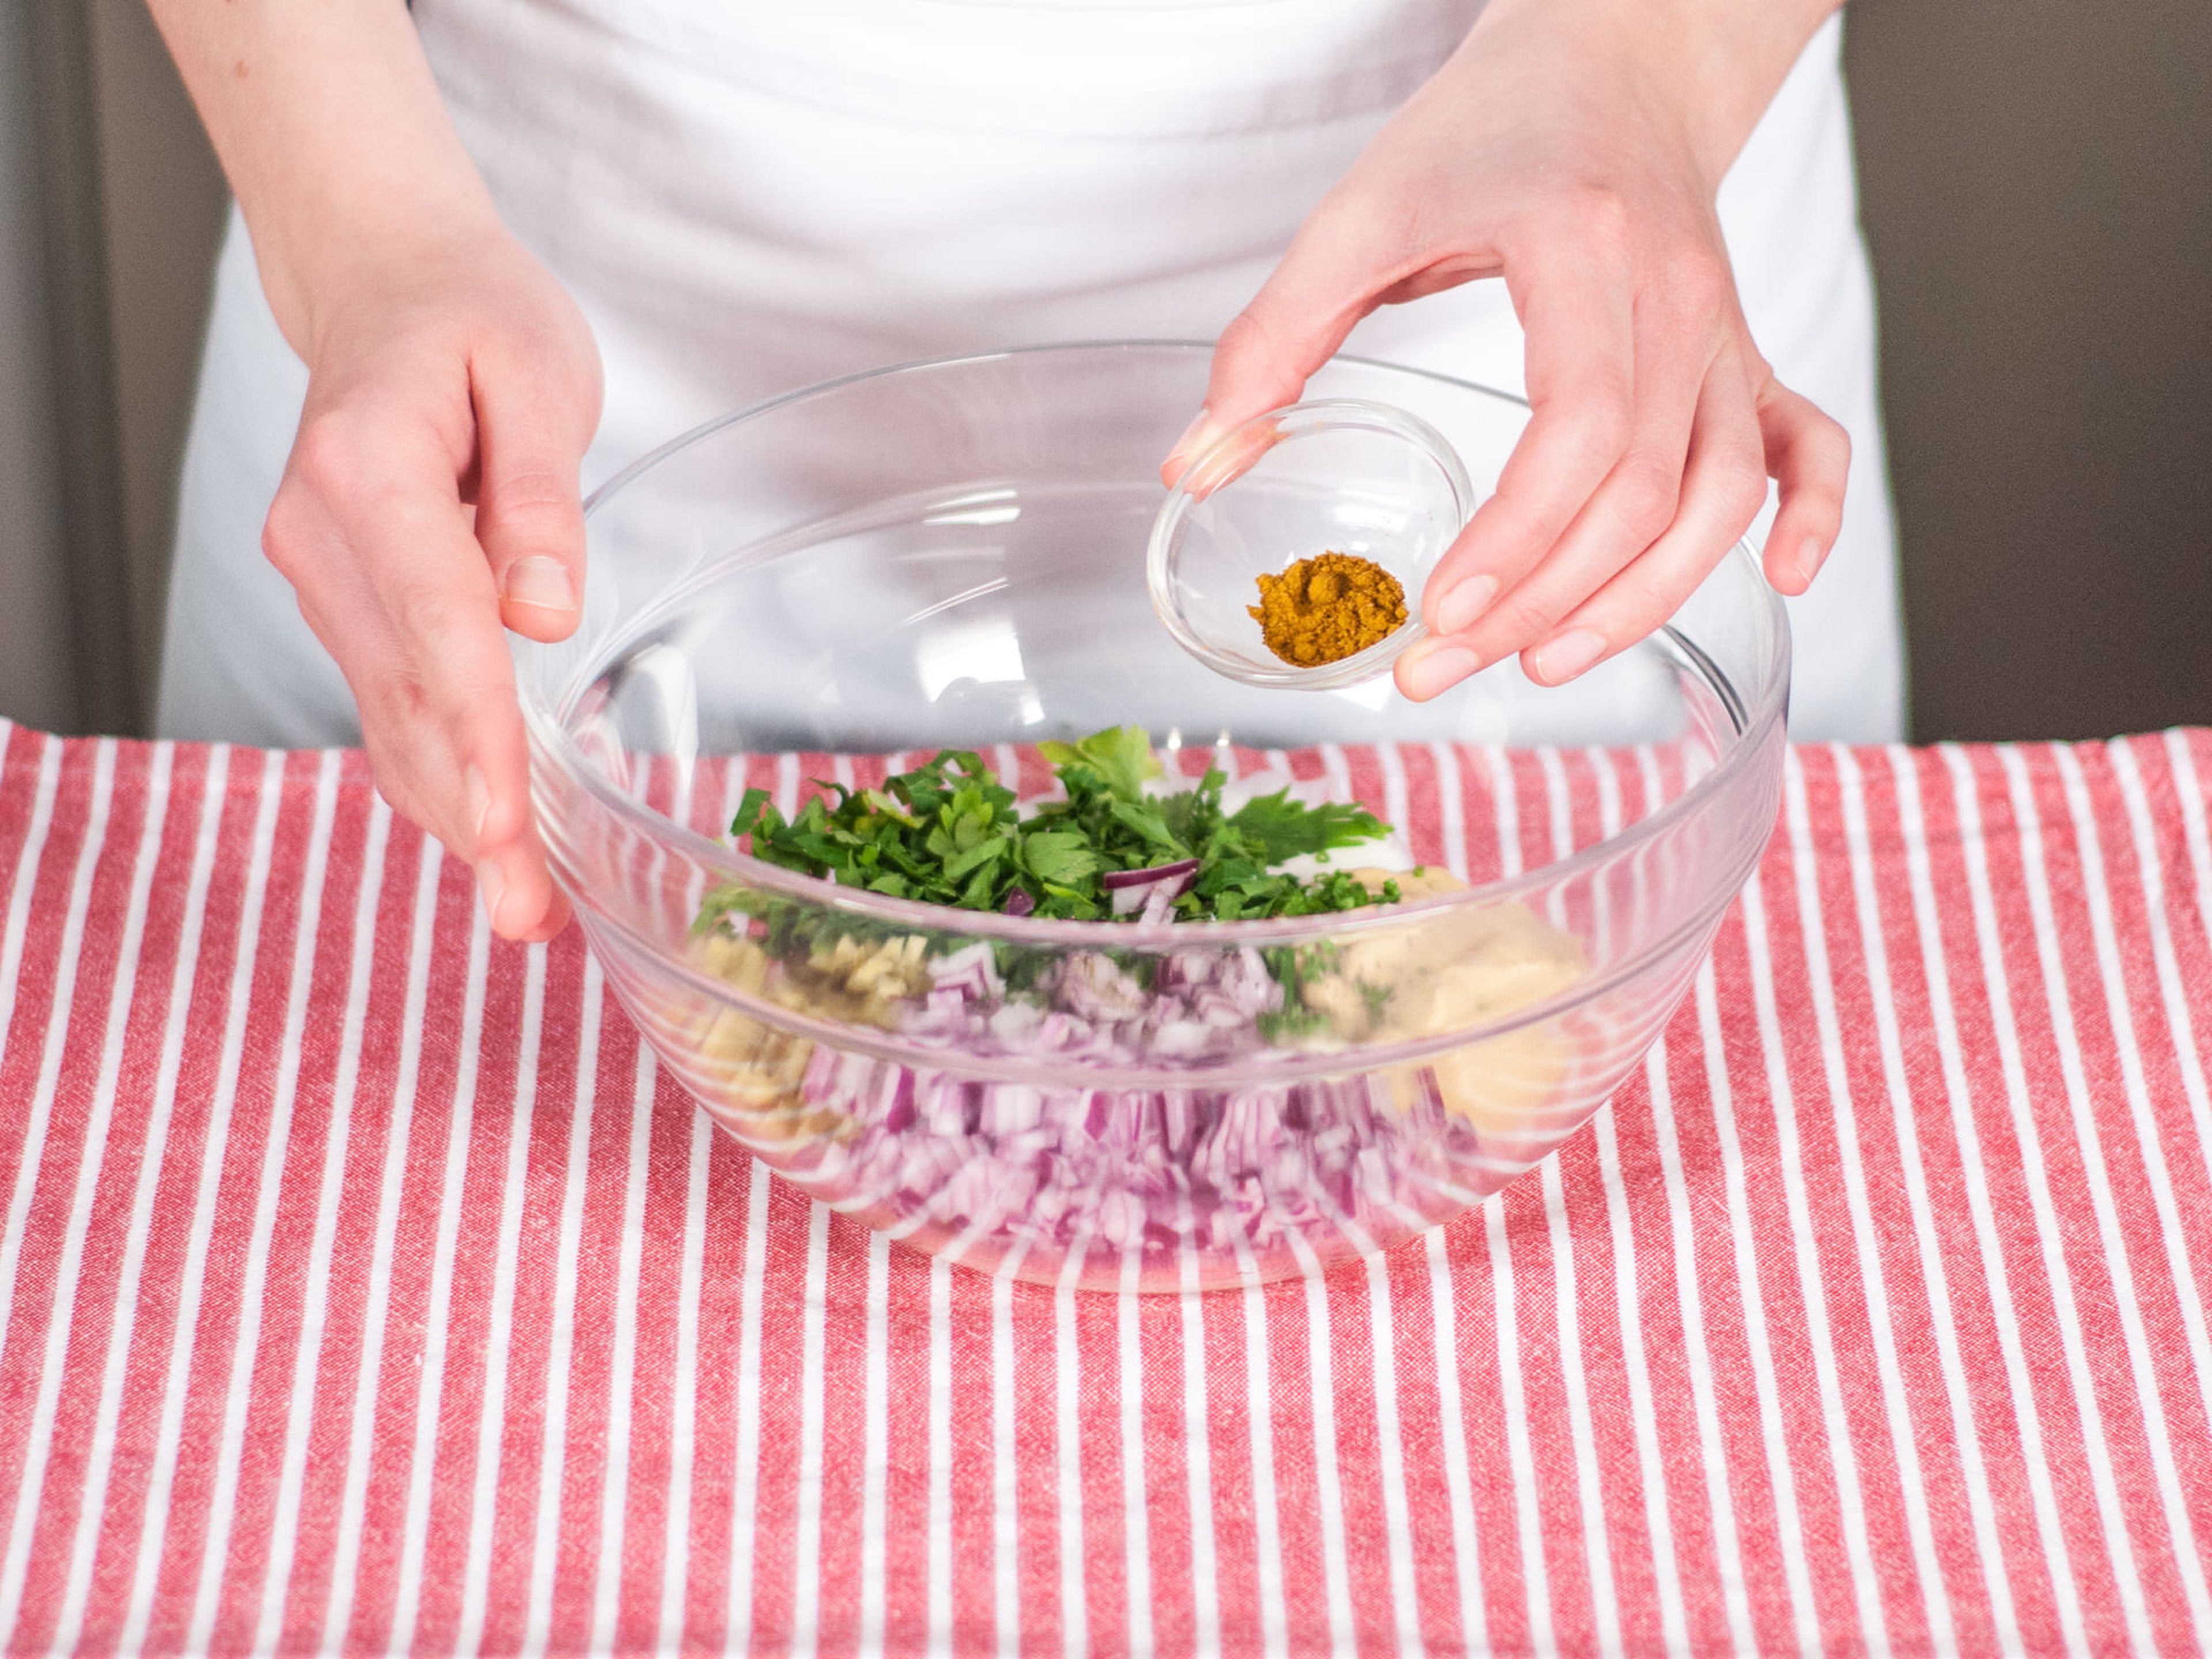 For remoulade, squeeze lemon juice into a large bowl. Add remaining pickles and red onion, chopped parsley and chives, yogurt, mayonnaise, and curry powder. Season with salt and pepper and mix well.